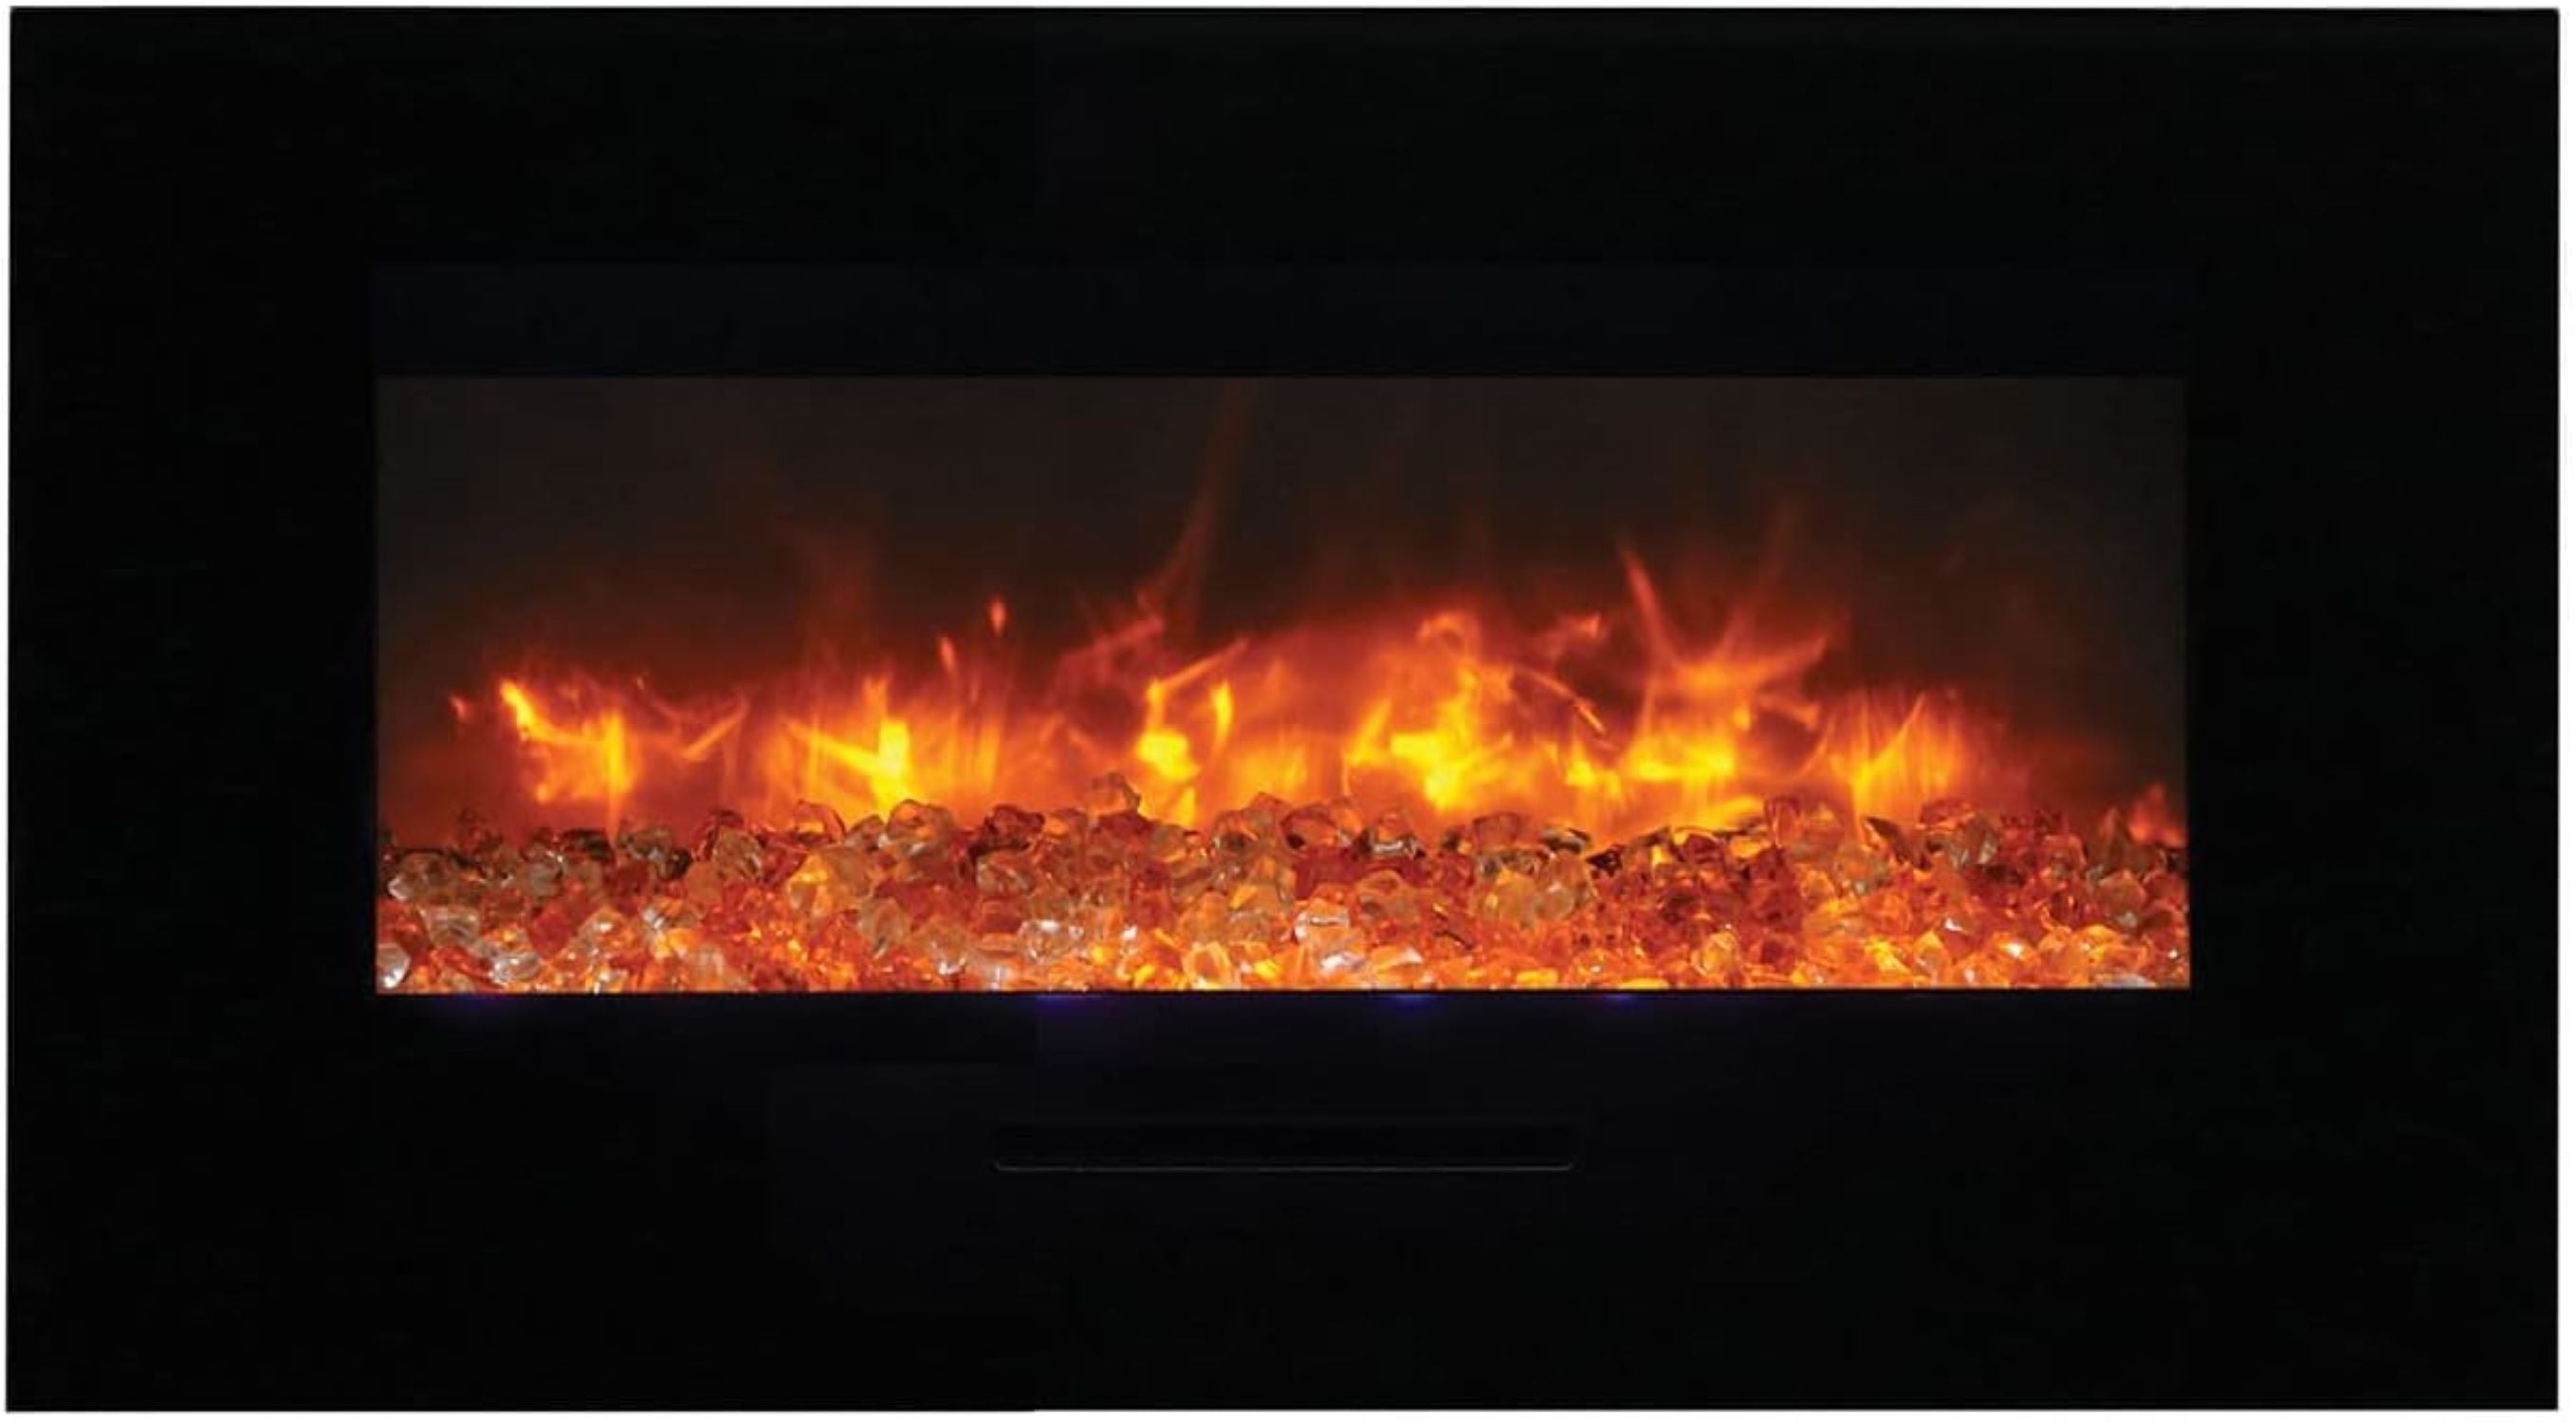 Amantii 48" Wall Mount/Flush Mount Electric Fireplace with Glass Surround -WM-FM-48-5823-BG- Front View With Orange Flame